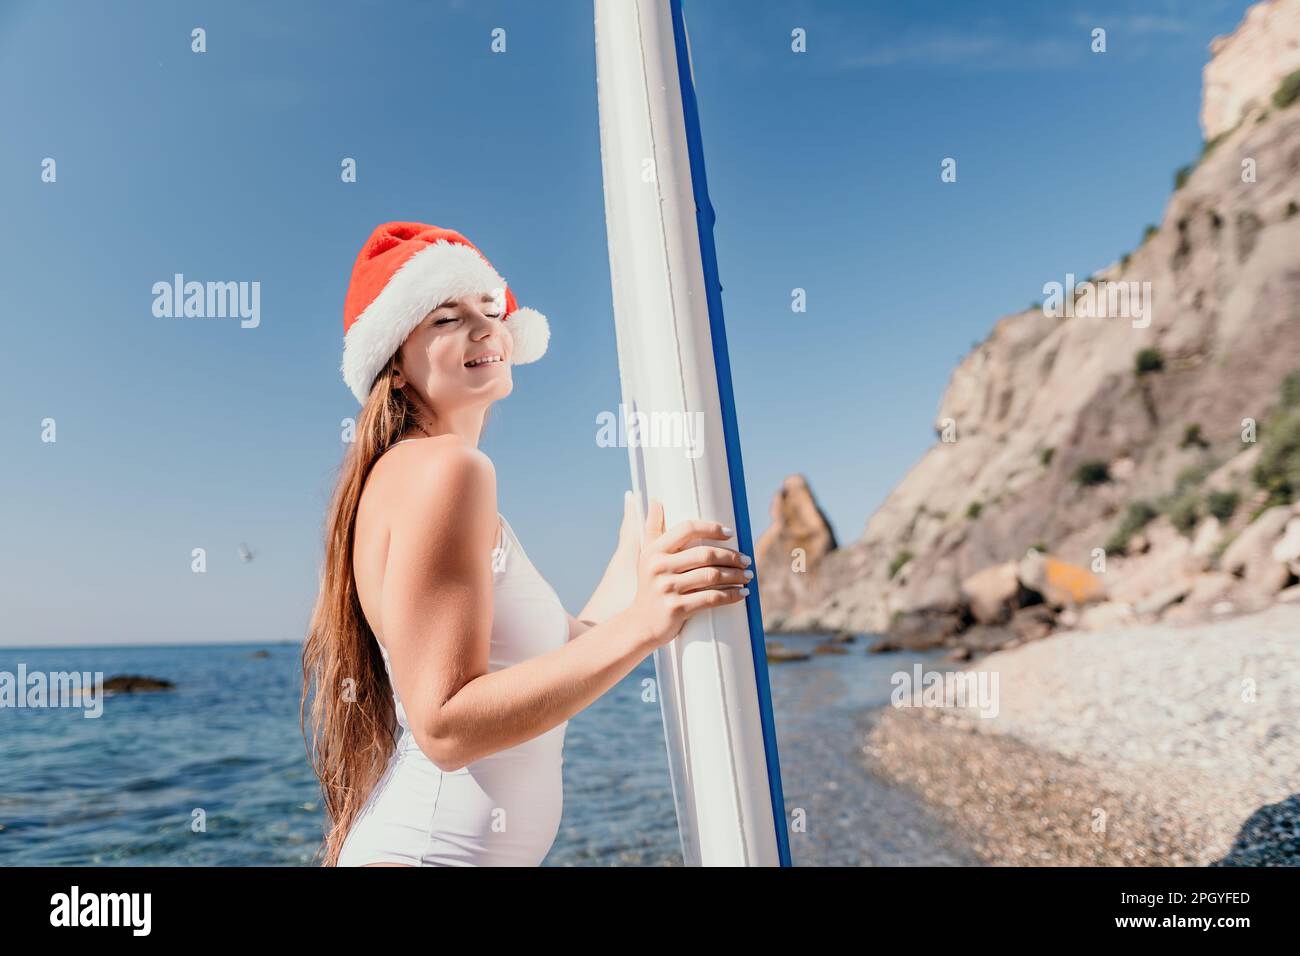 Woman sea sup. Close up portrait of happy young caucasian woman with long hair in Santa hat looking at camera and smiling. Cute woman portrait in a Stock Photo